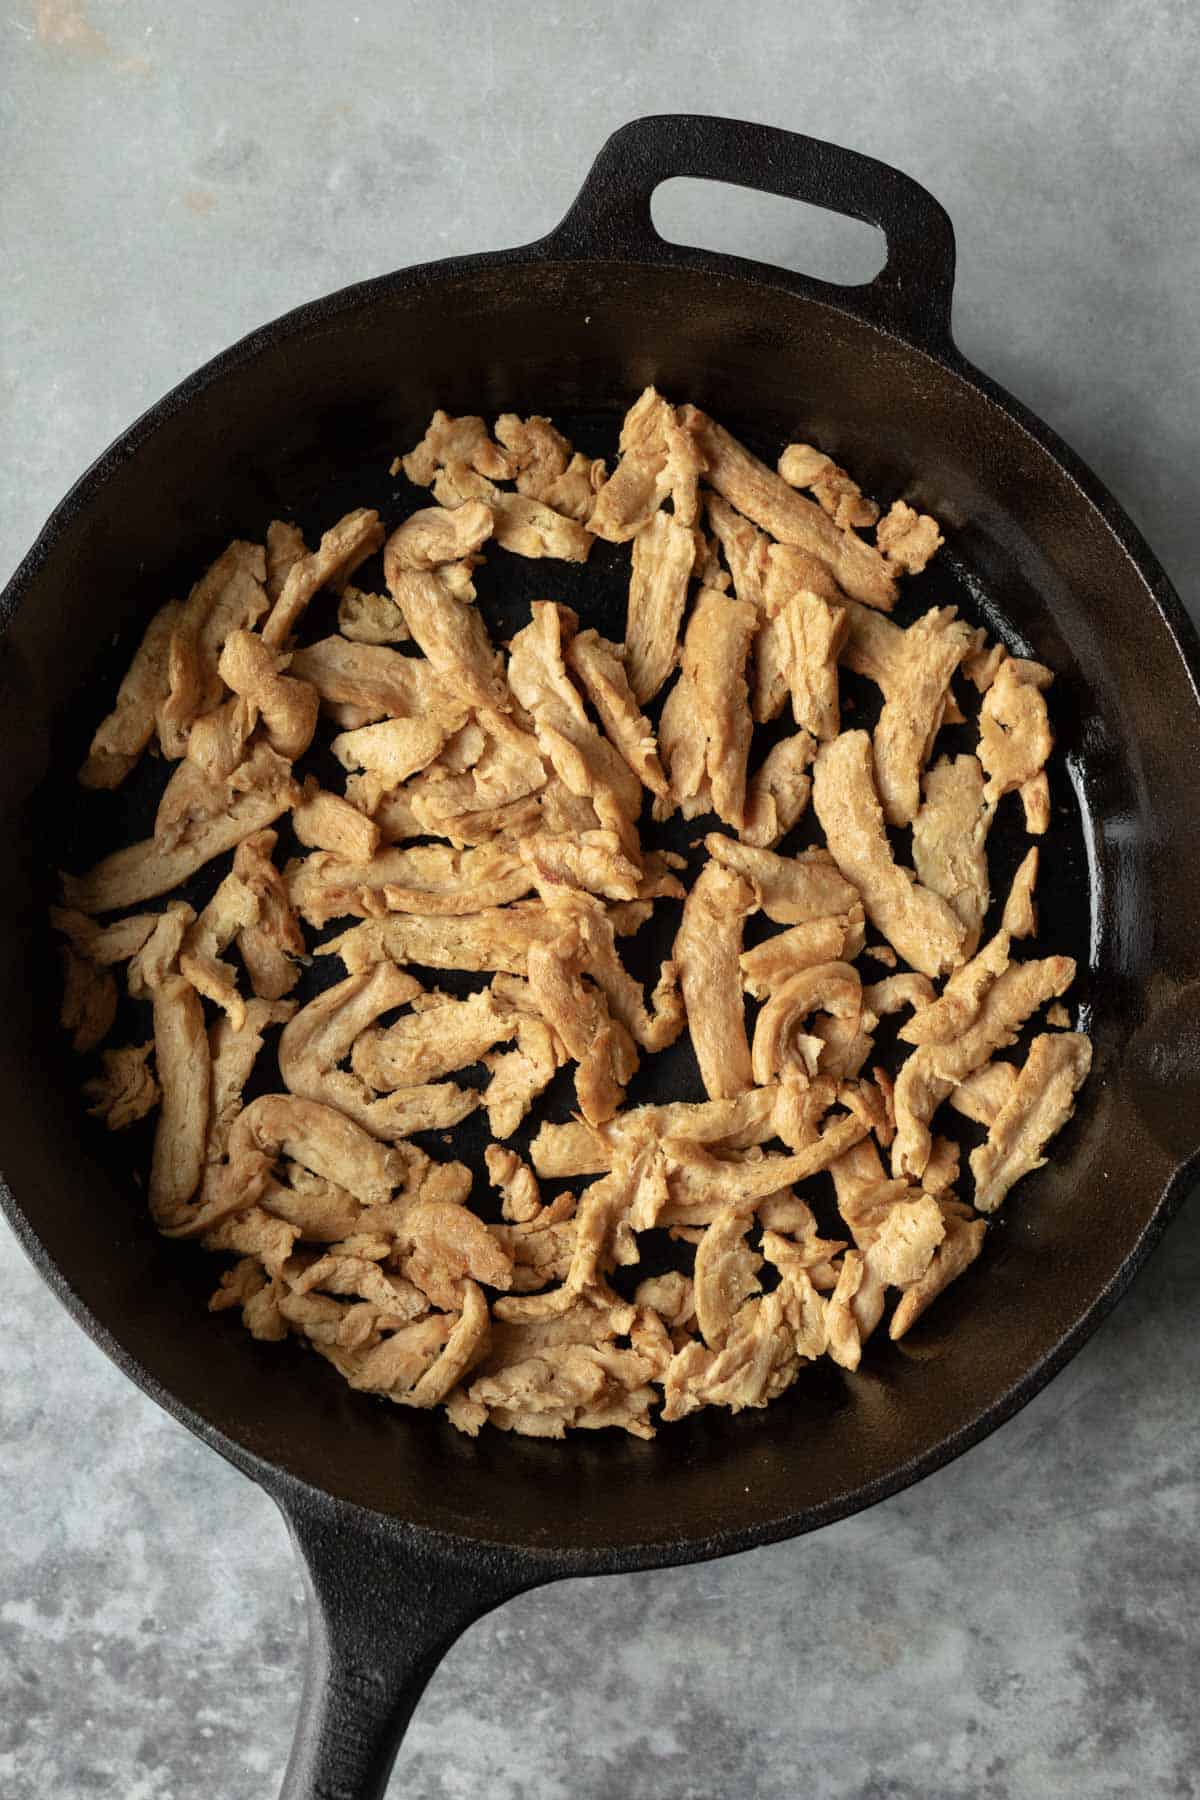 Chicken-style soy curls cooking in a skillet.